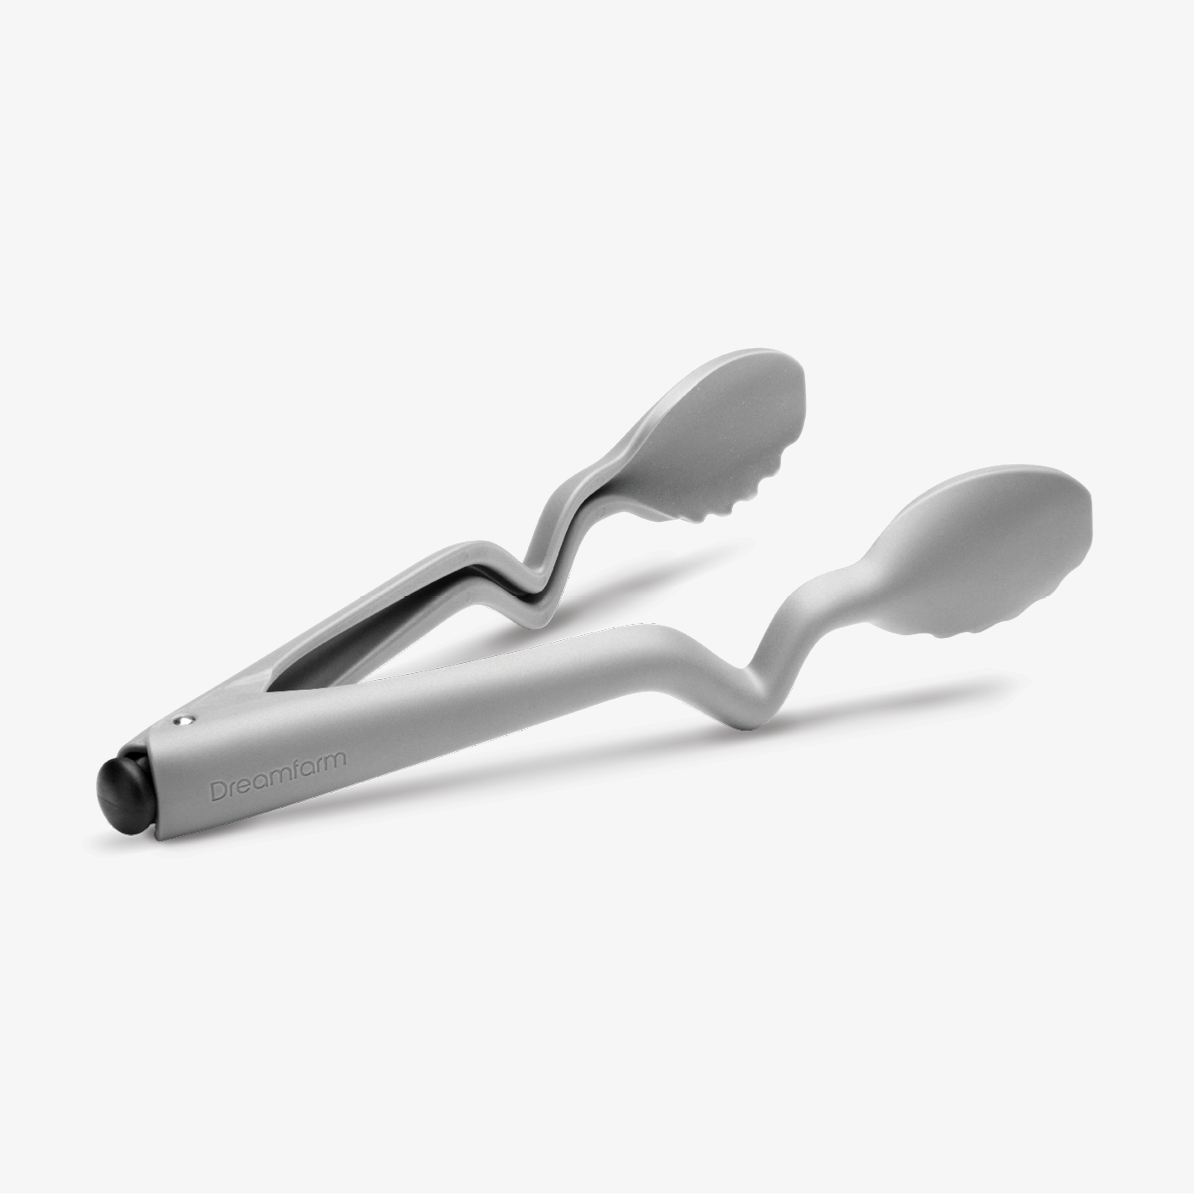 Clongs Lite are heat-resistant nylon, click-lock tongs that sit up off your bench, and open or lock closed with the click of a button. Just like a retractable “clicky” pen, open your Clongs Lite with the push of a click-button, then hold them closed and push the click-button again to lock them closed.